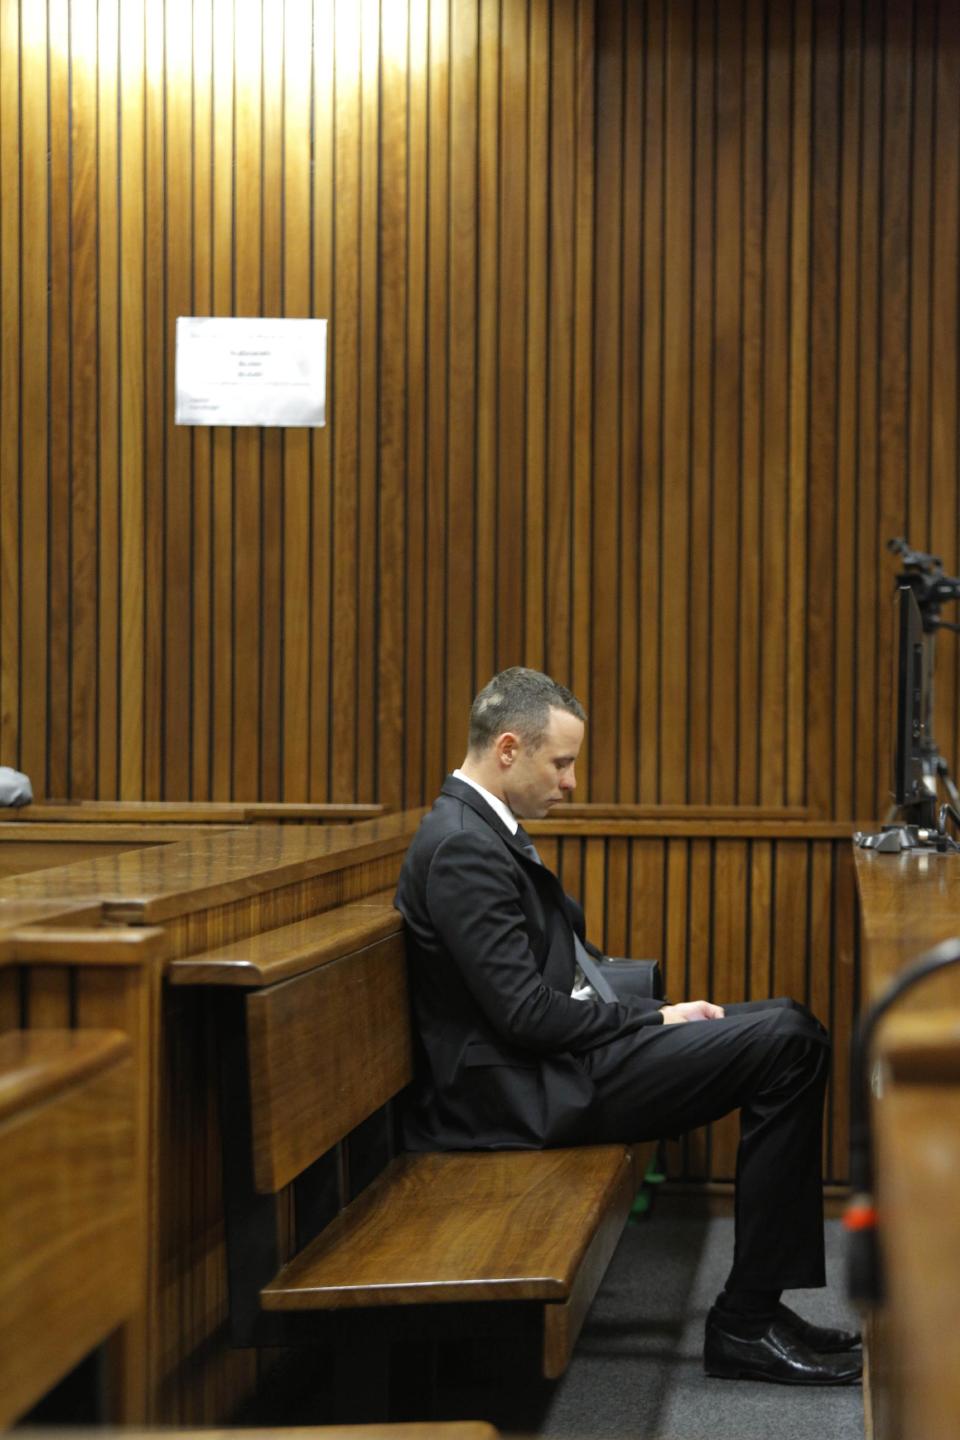 Oscar Pistorius is seated in a courtroom at the high court for his ongoing murder trial in Pretoria, South Africa, Monday, May 12, 2014. Pistorius is charged with the shooting death of his girlfriend Reeva Steenkamp on Valentine's Day in 2013. (AP Photo/Kim Ludbrook, Pool)